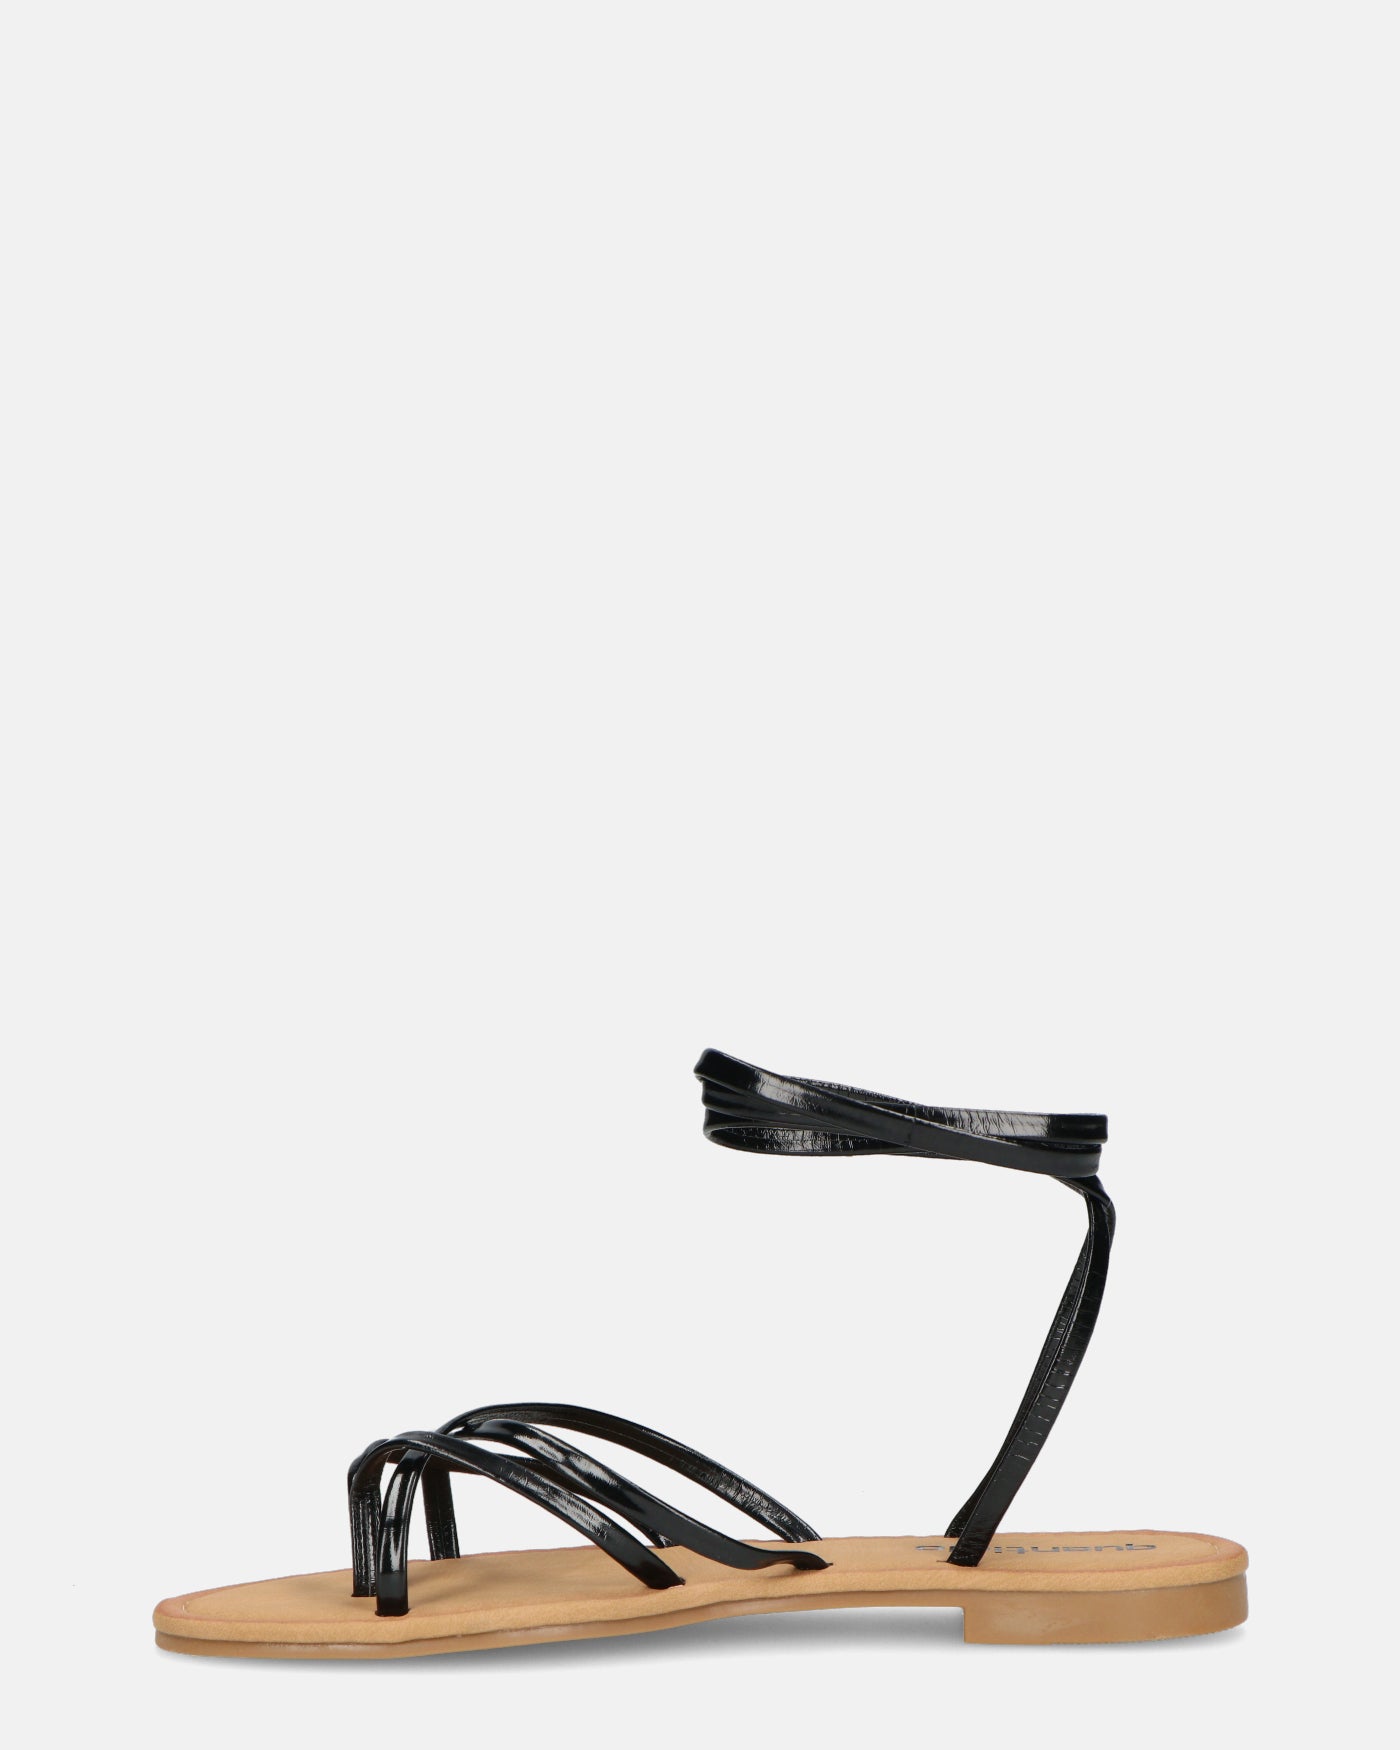 NINA - flat sandals with black colored strap and bands